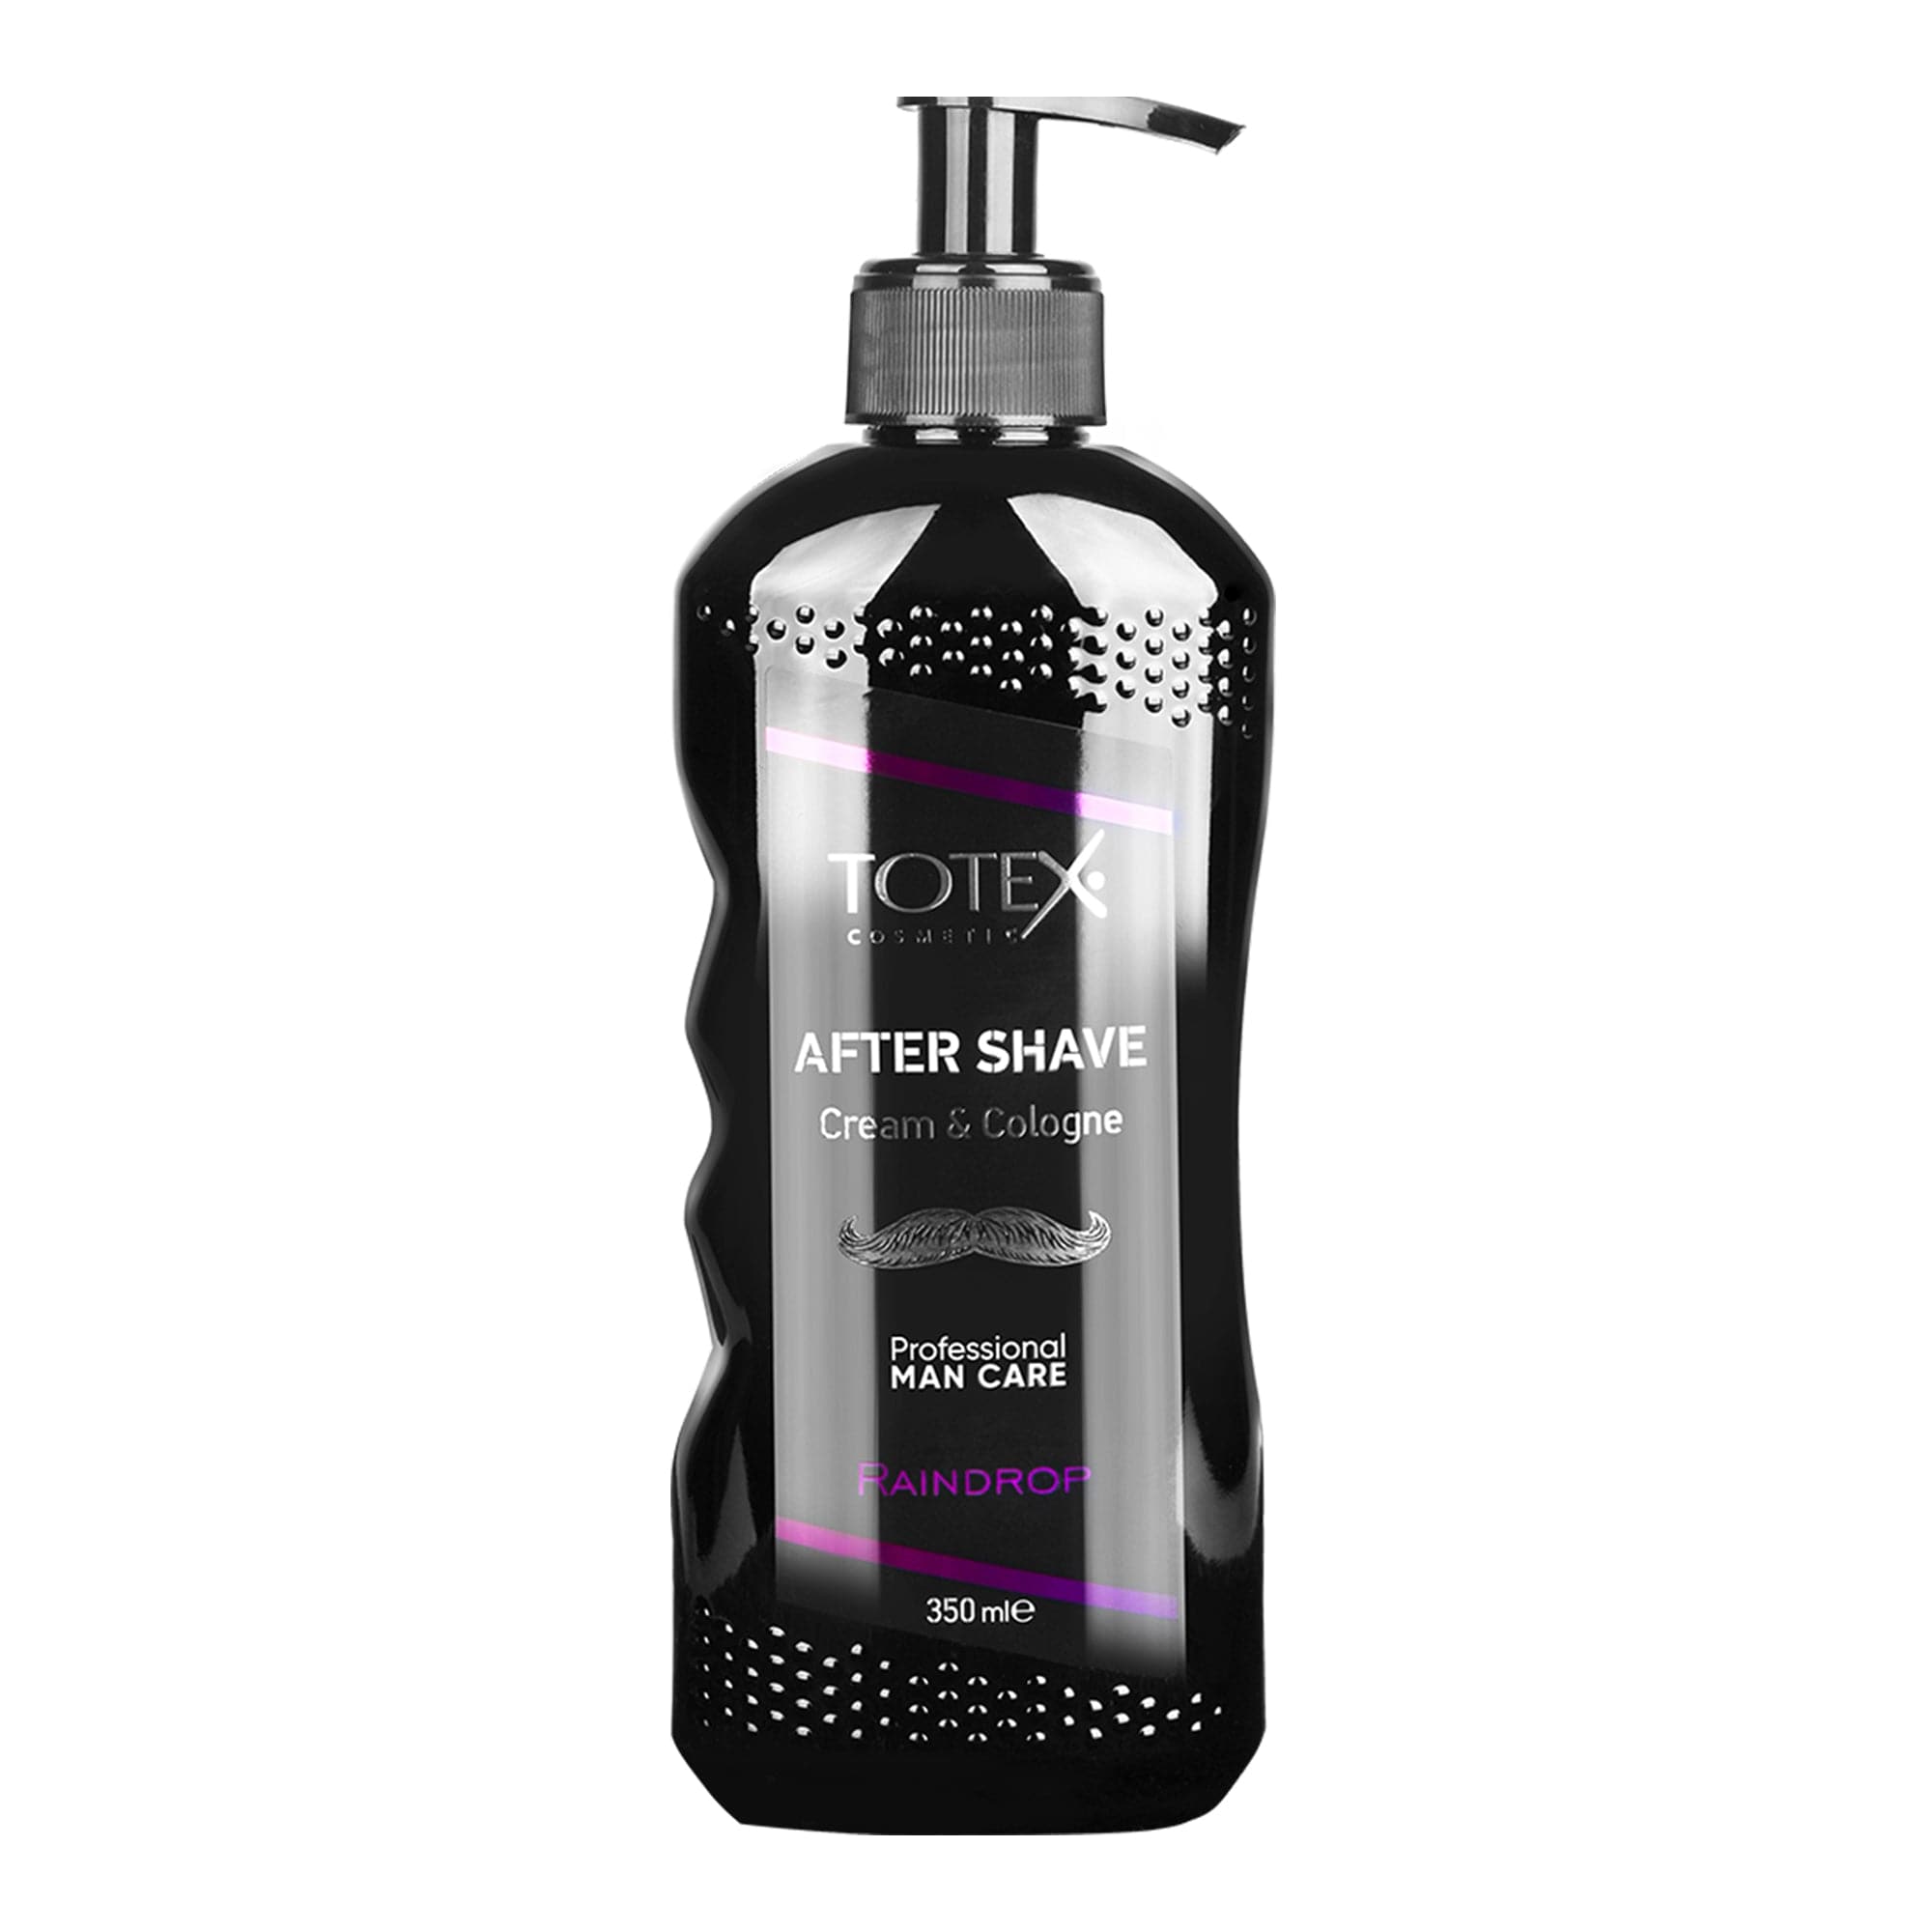 Totex - After Shave Cream & Cologne Raindrop 350ml